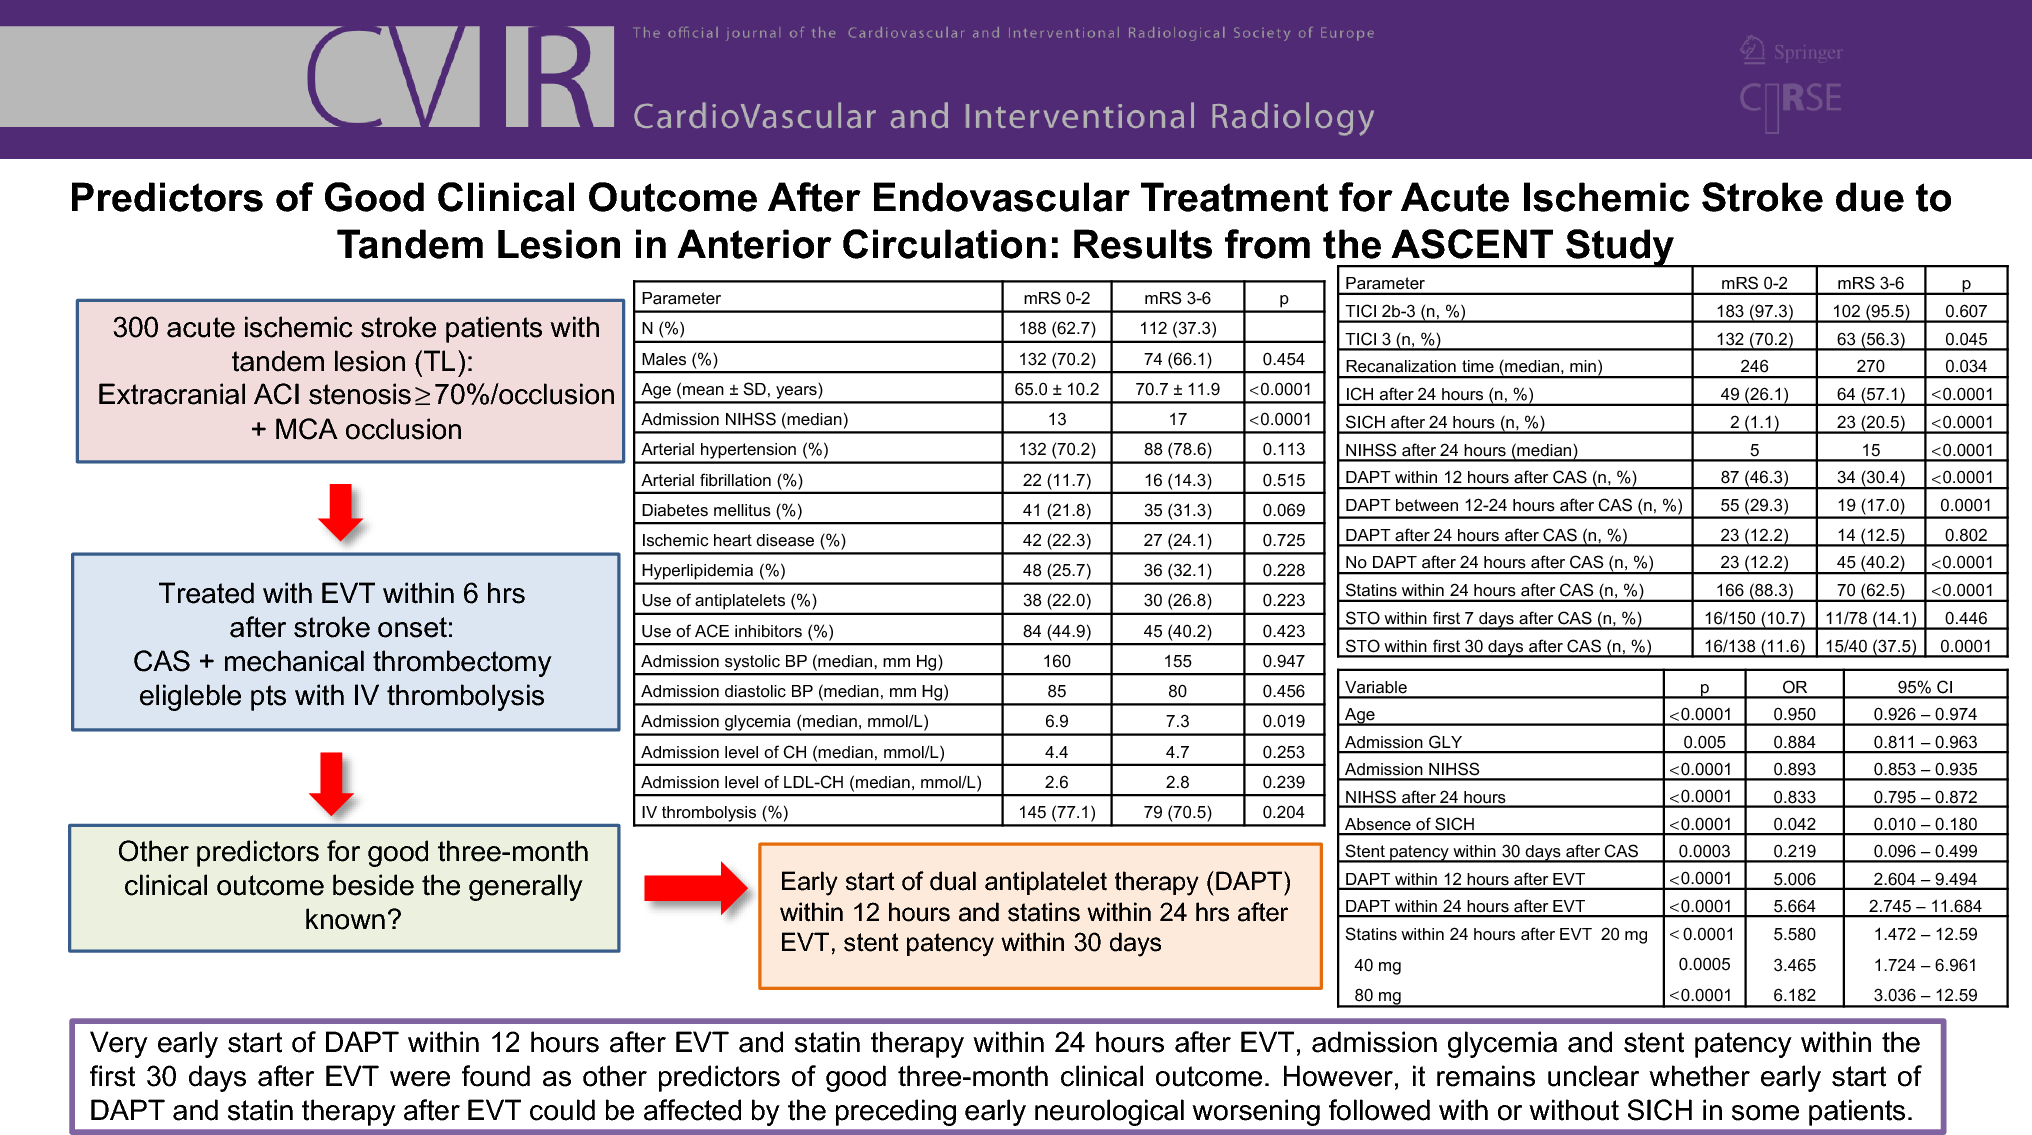 Predictors of Good Clinical Outcome After Endovascular Treatment for Acute Ischemic Stroke due to Tandem Lesion in Anterior Circulation: Results from the ASCENT Study